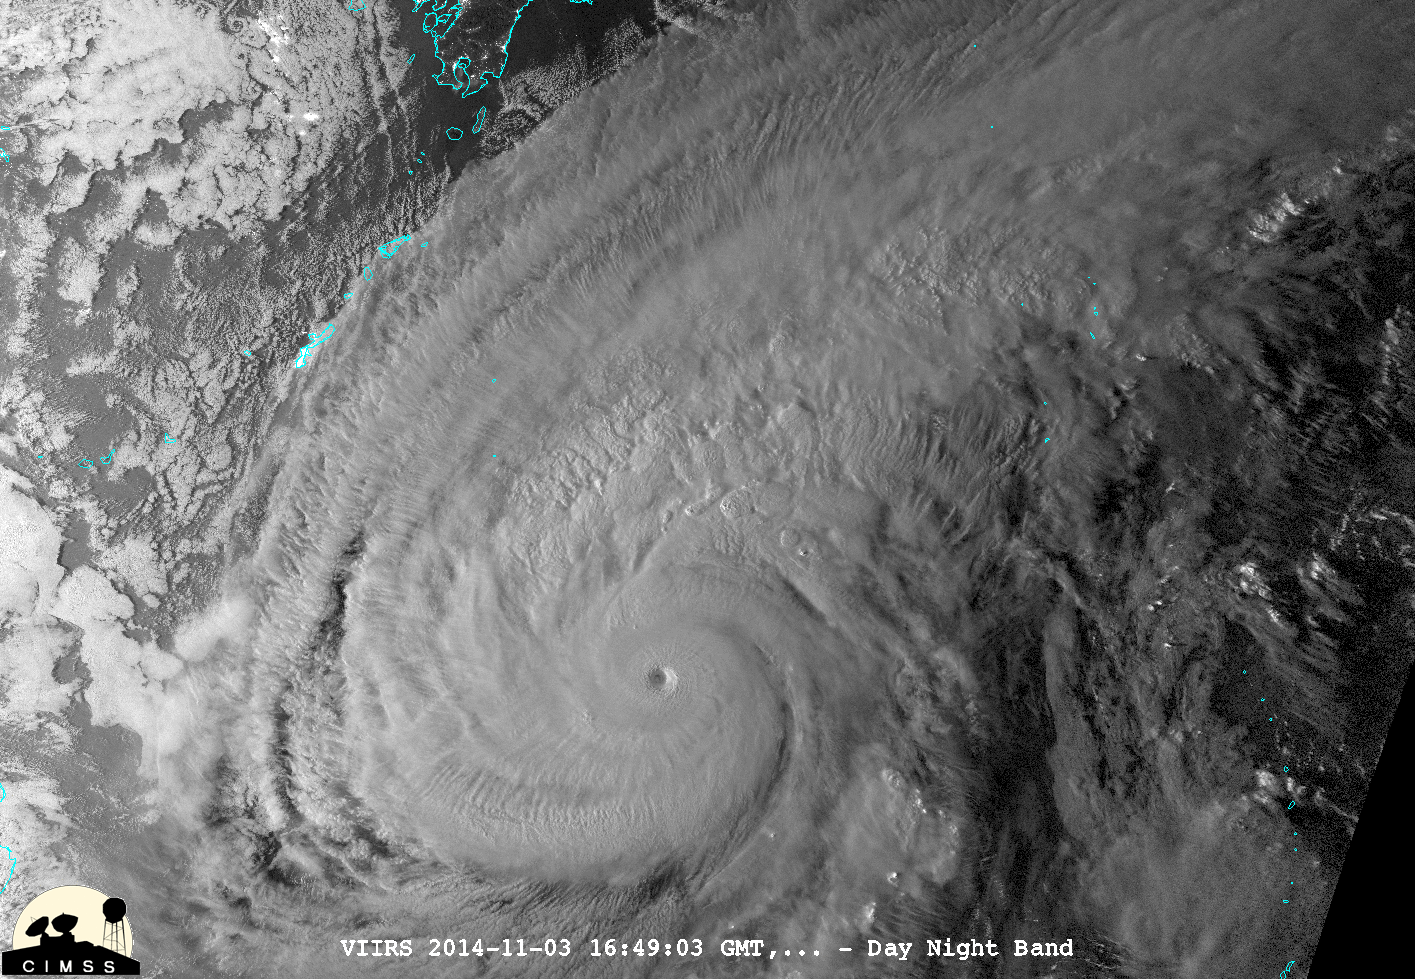 Suomi NPP VIIRS Day Night Band and 11.45 µm Infrared images of the typhoon (click to enlarge)